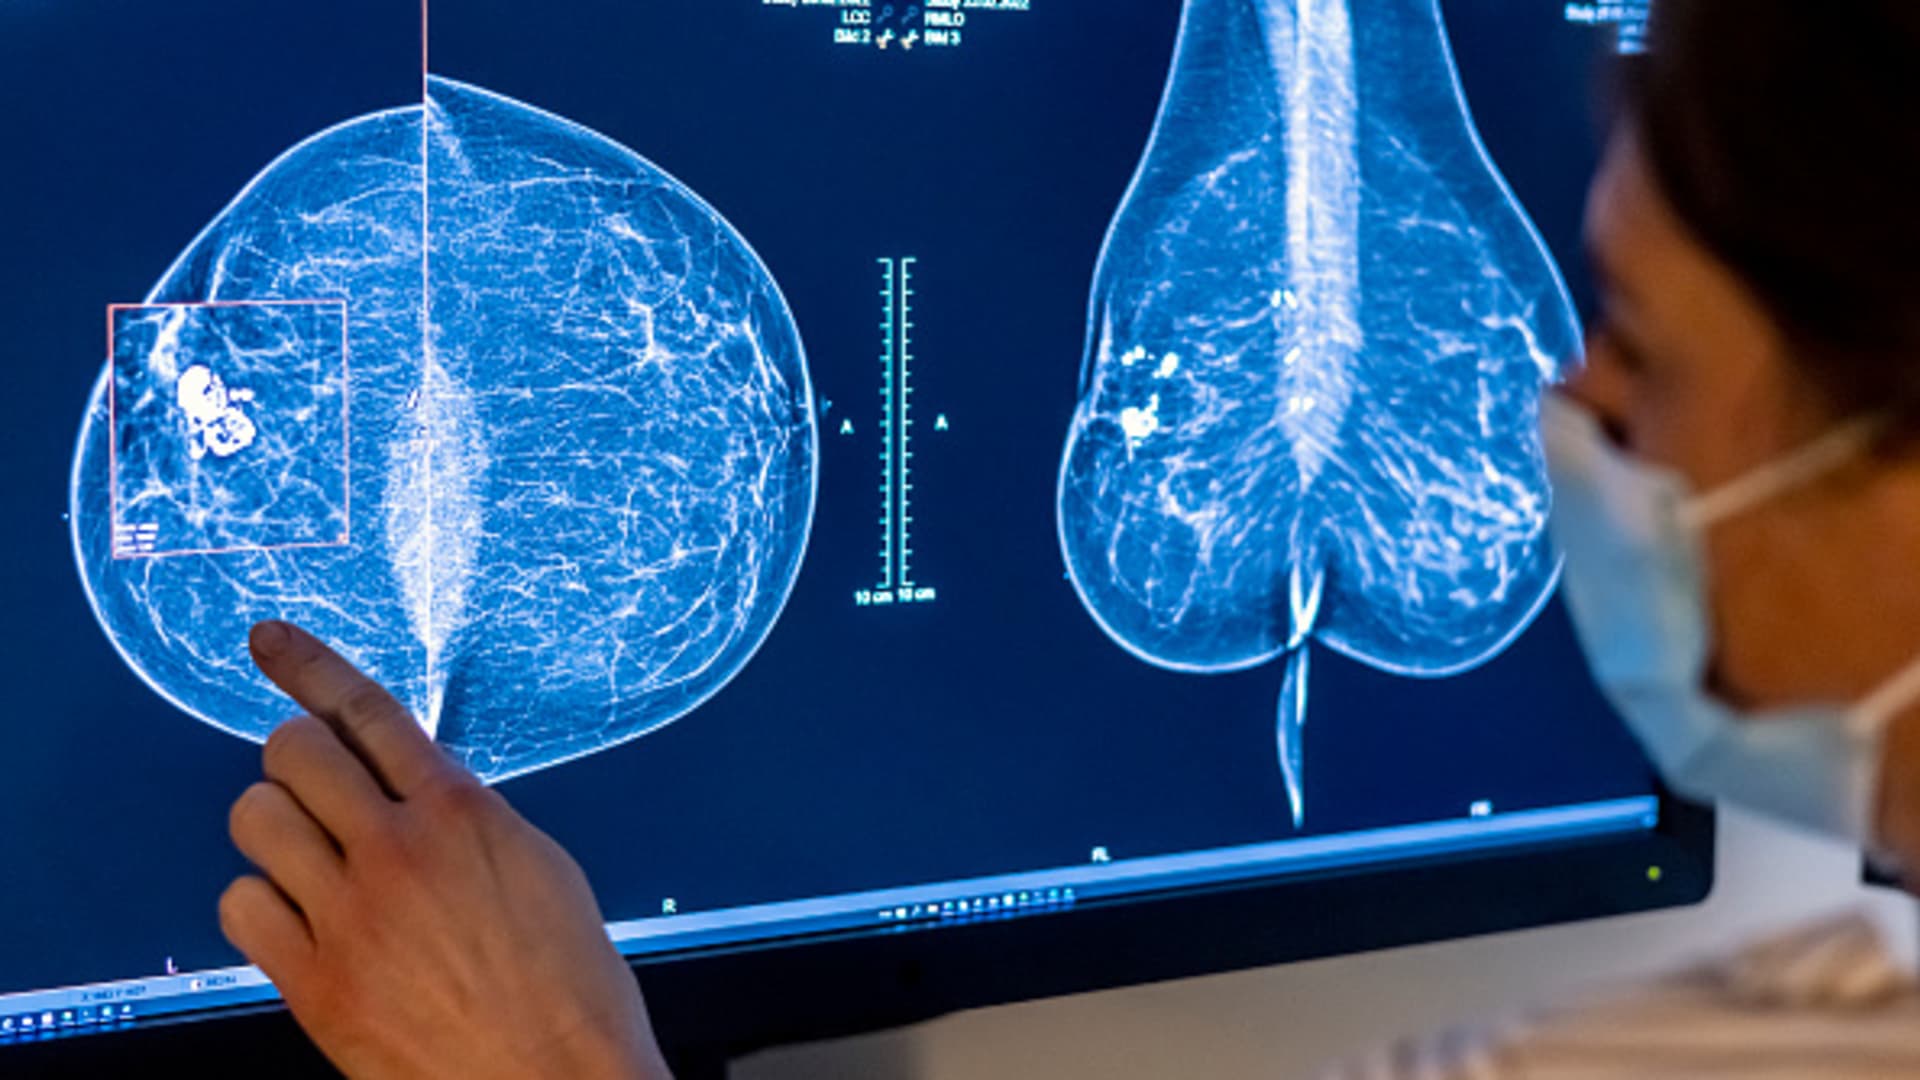 Breast cancer screenings should start at age 40